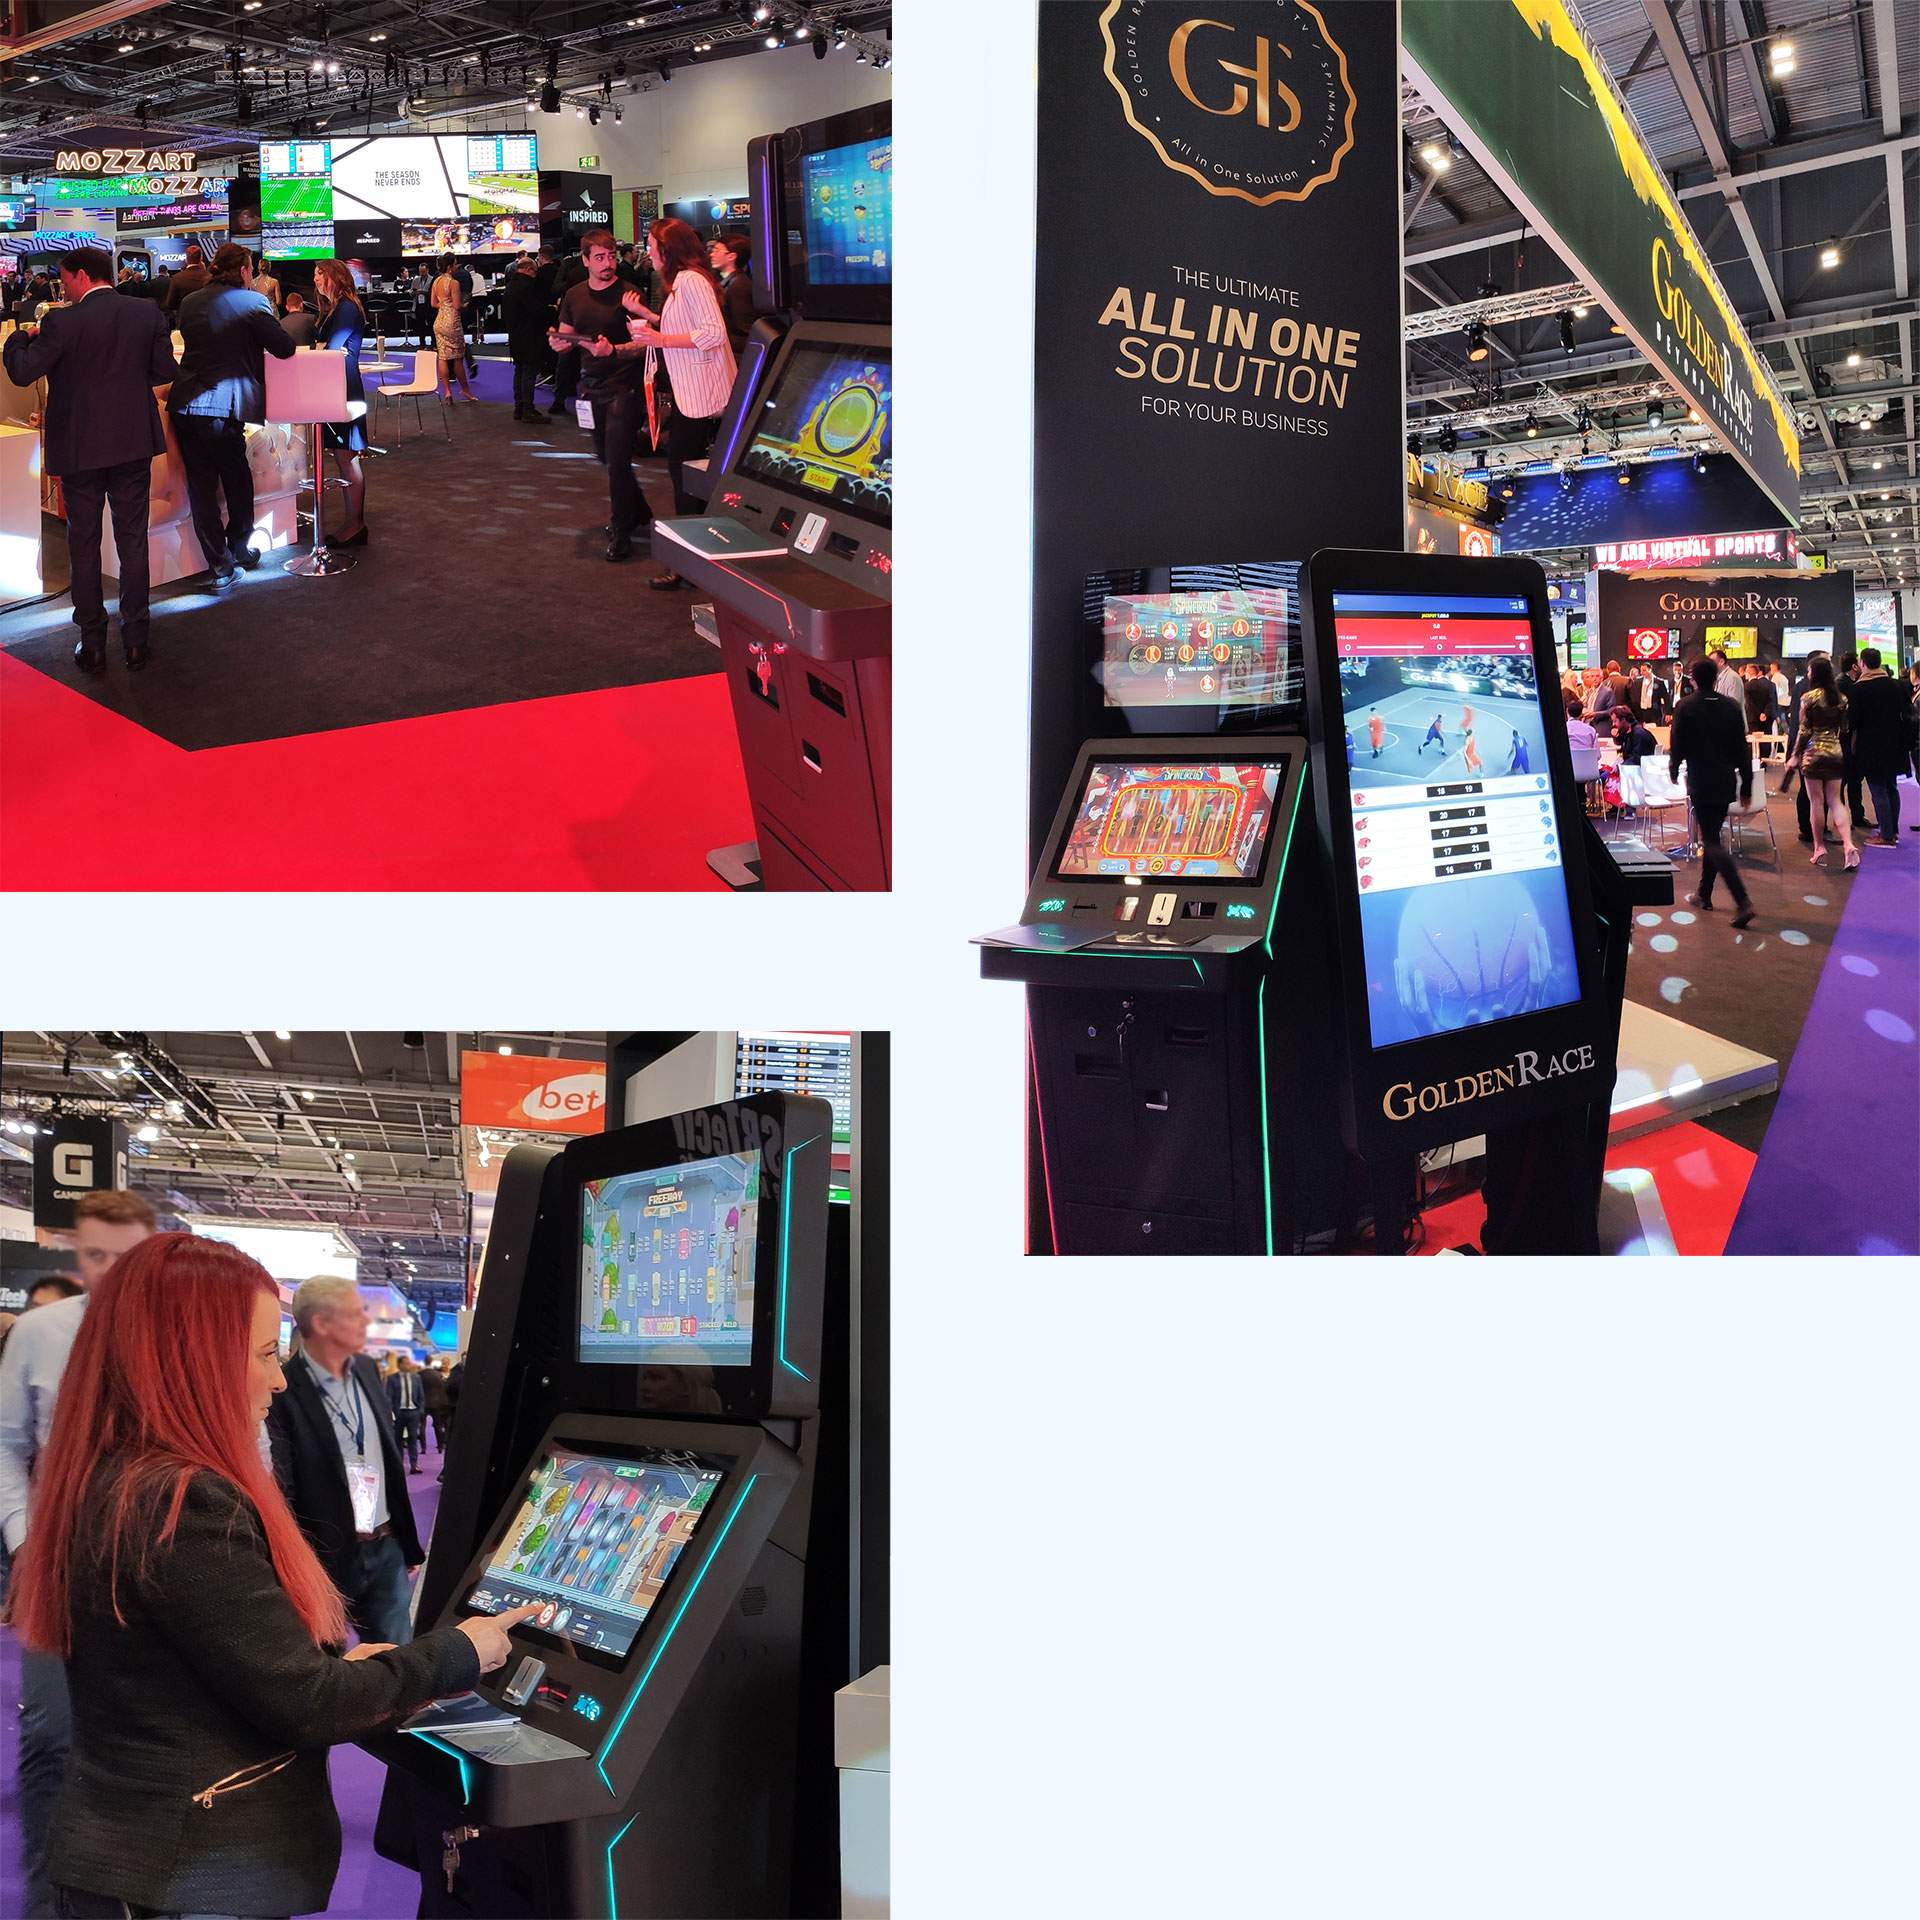 VRTech exhibited its latest gaming machines at ICE London 2020